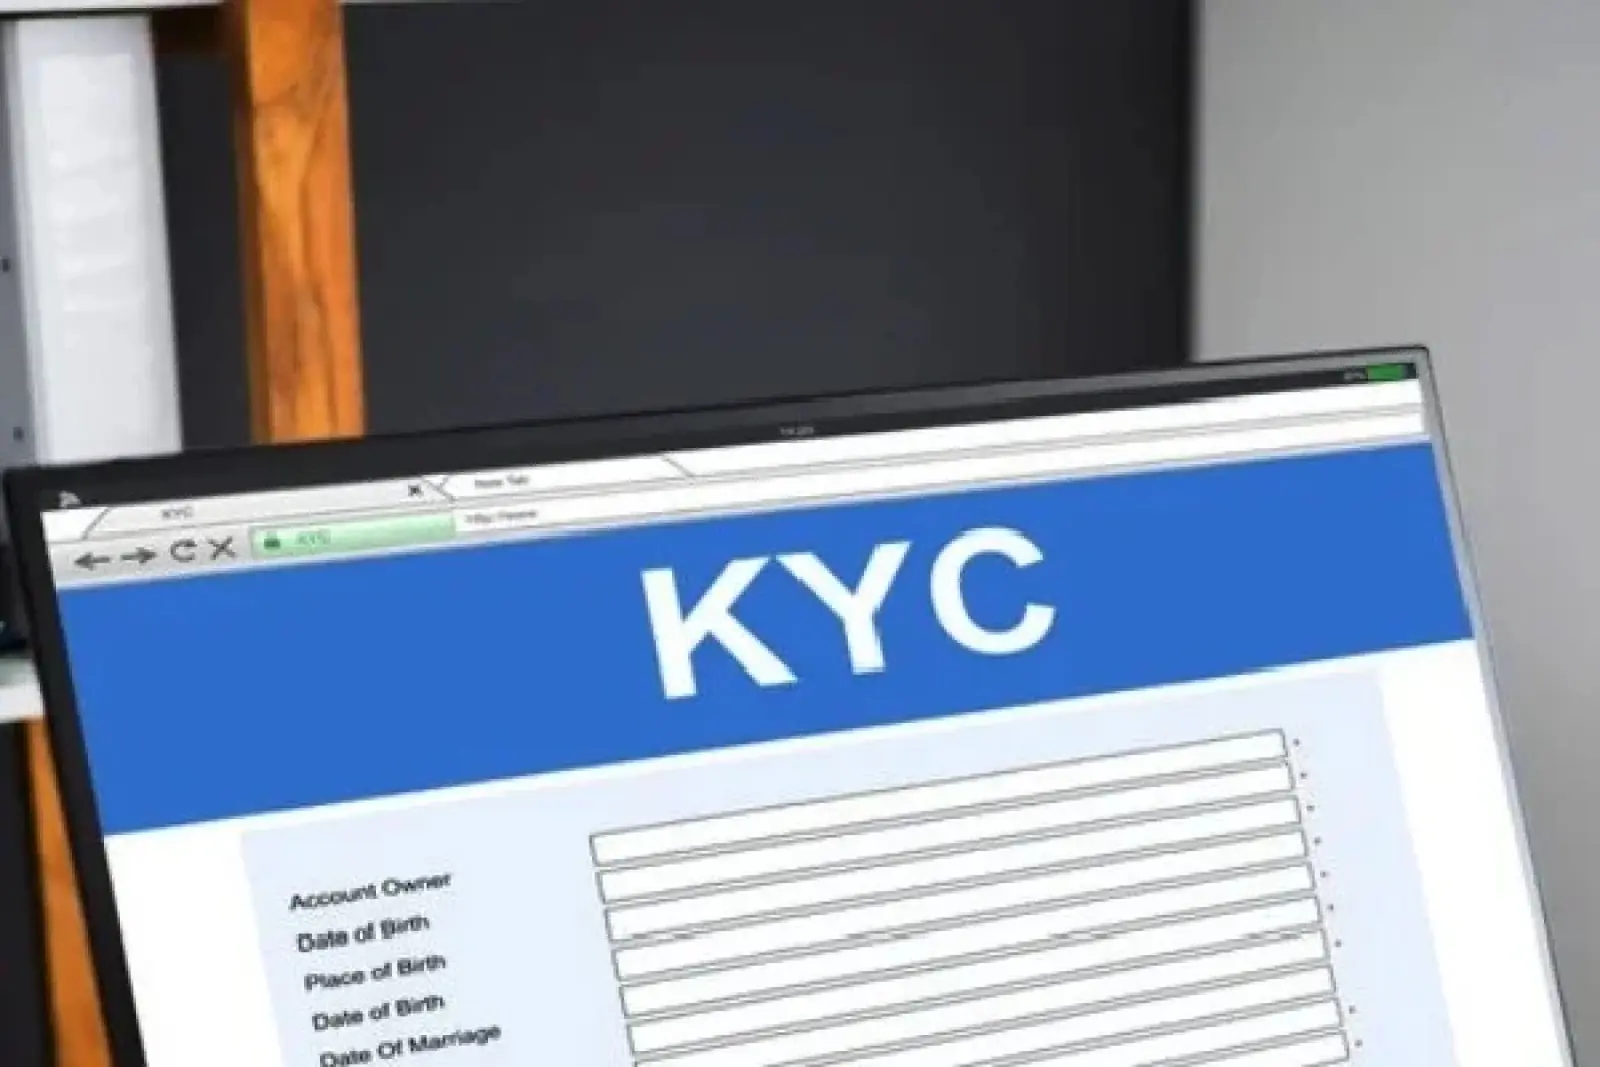 30 thousand mobile numbers will be closed that were involved in electricity bill KYC scam